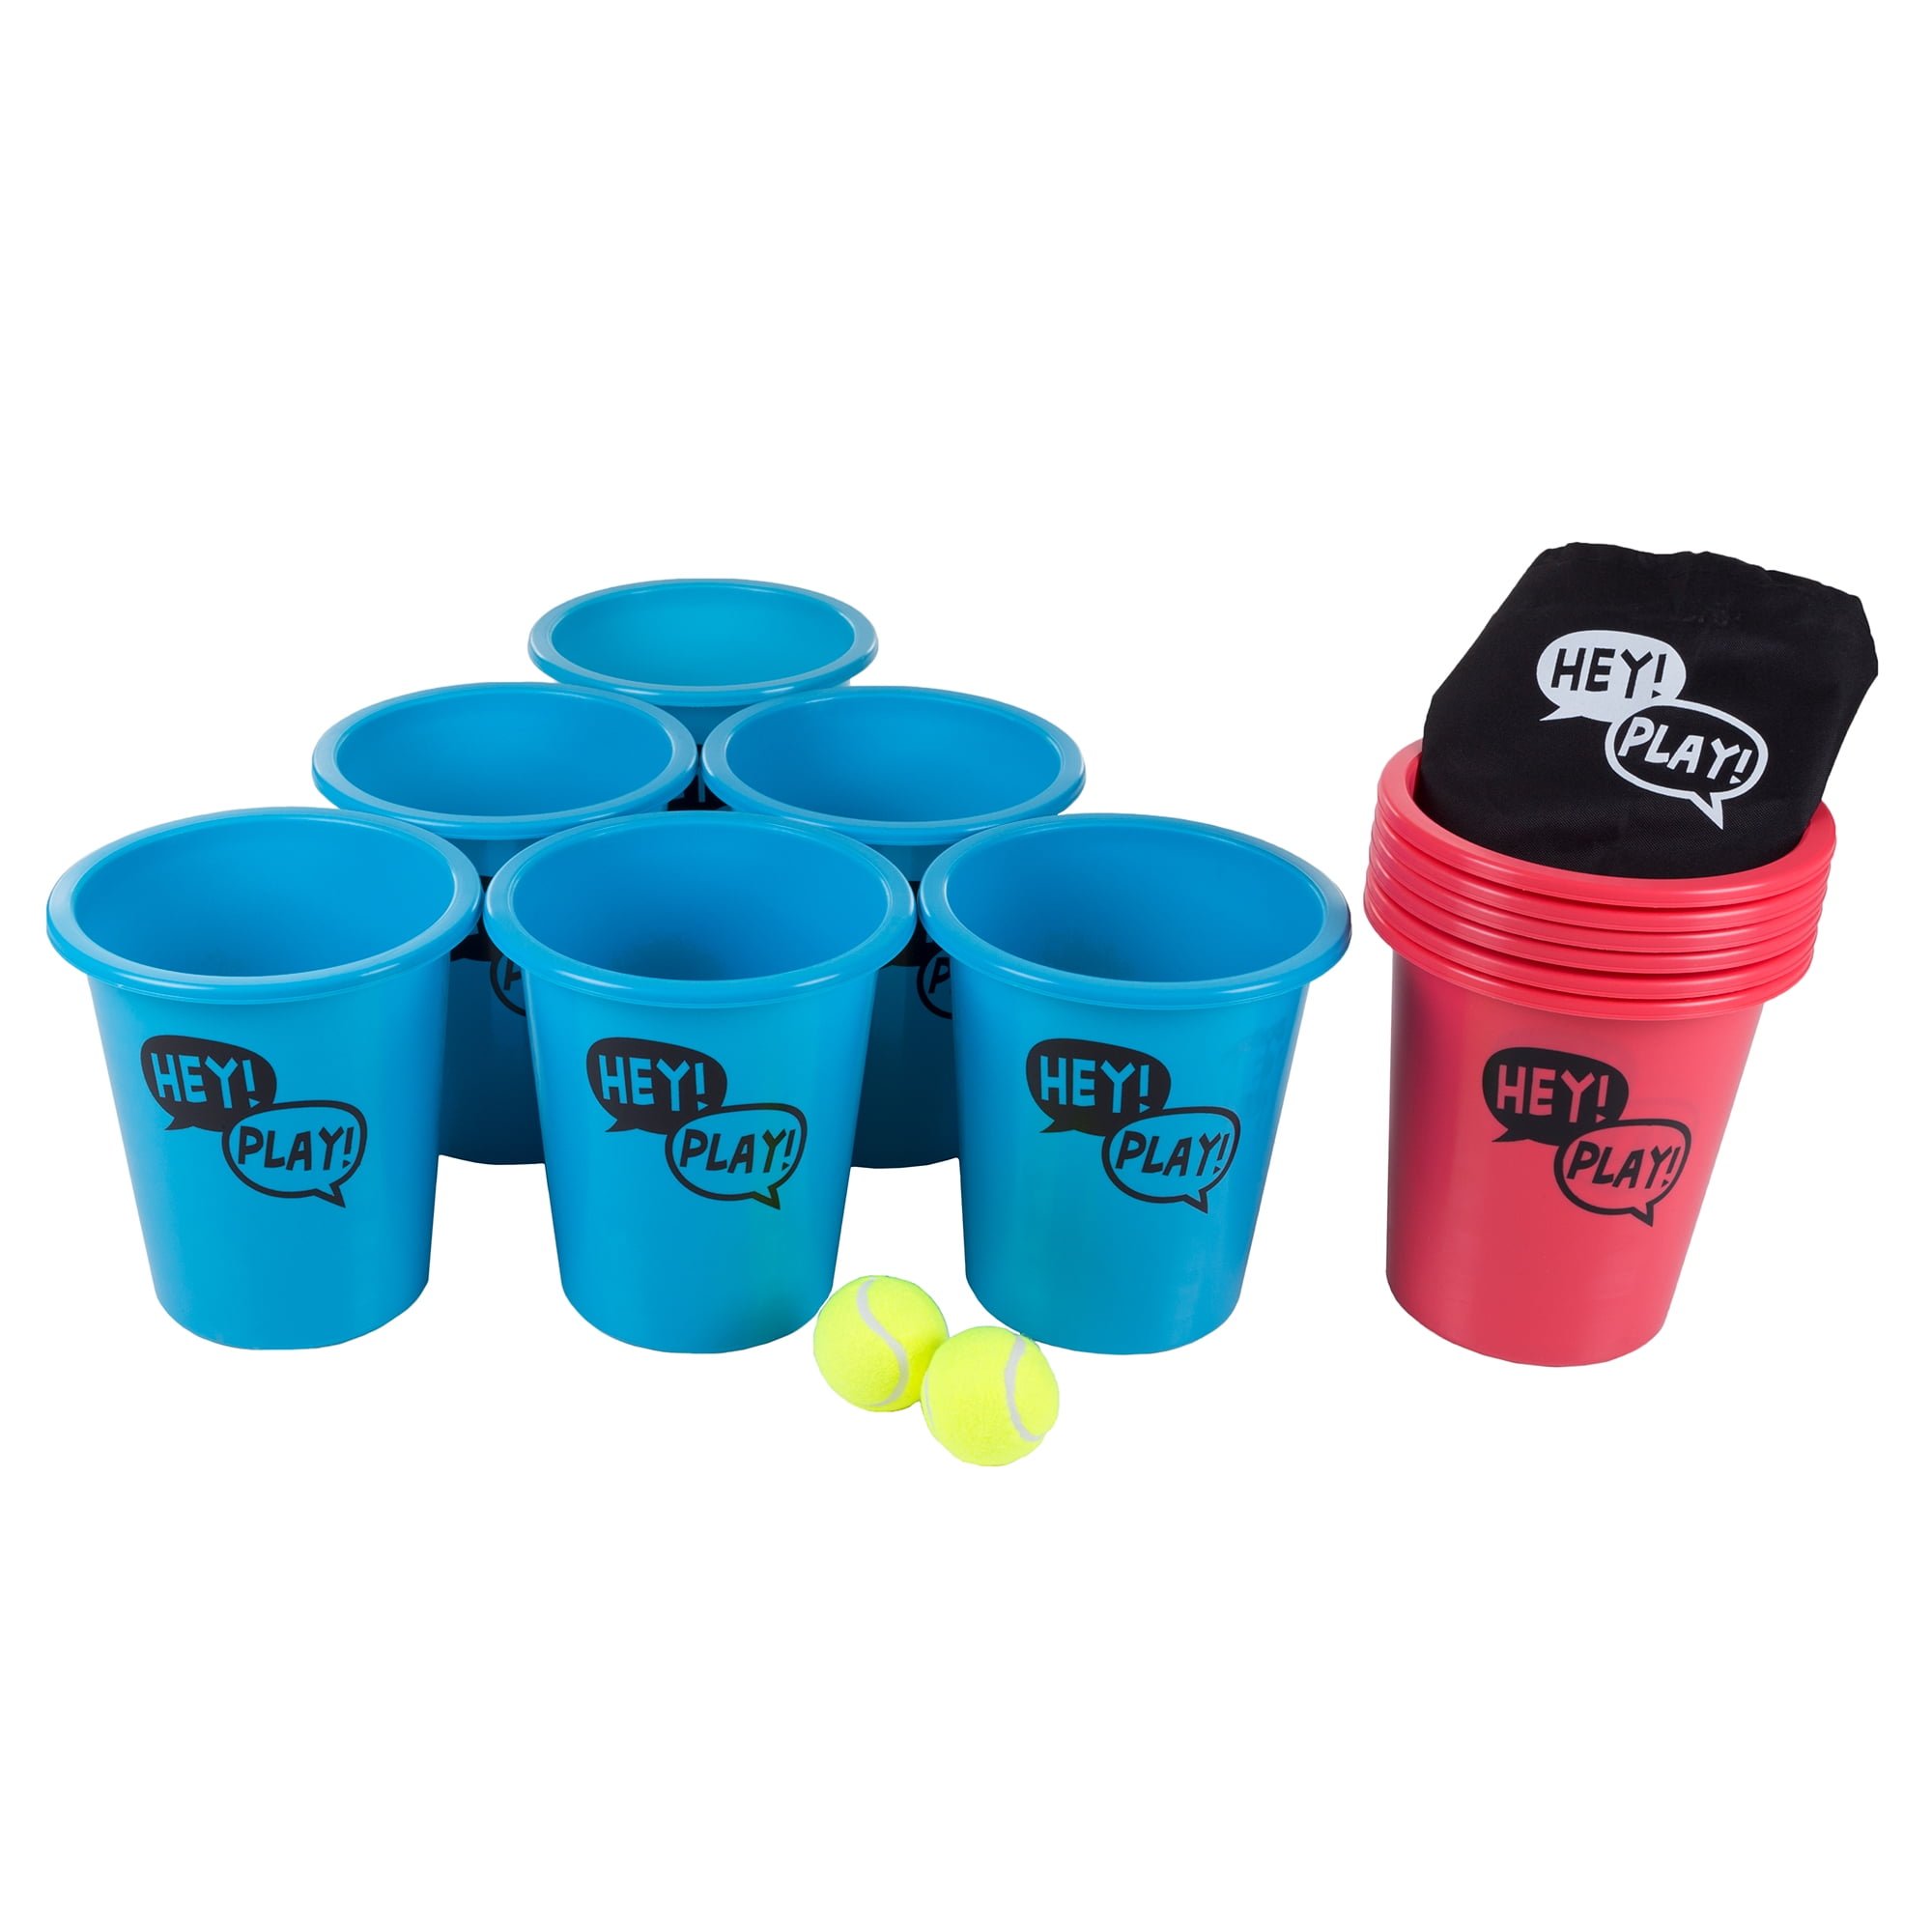 Hey! Play! Large Beer Pong Outdoor Game Set with 12 Buckets, 2 Balls, Tote  Bag